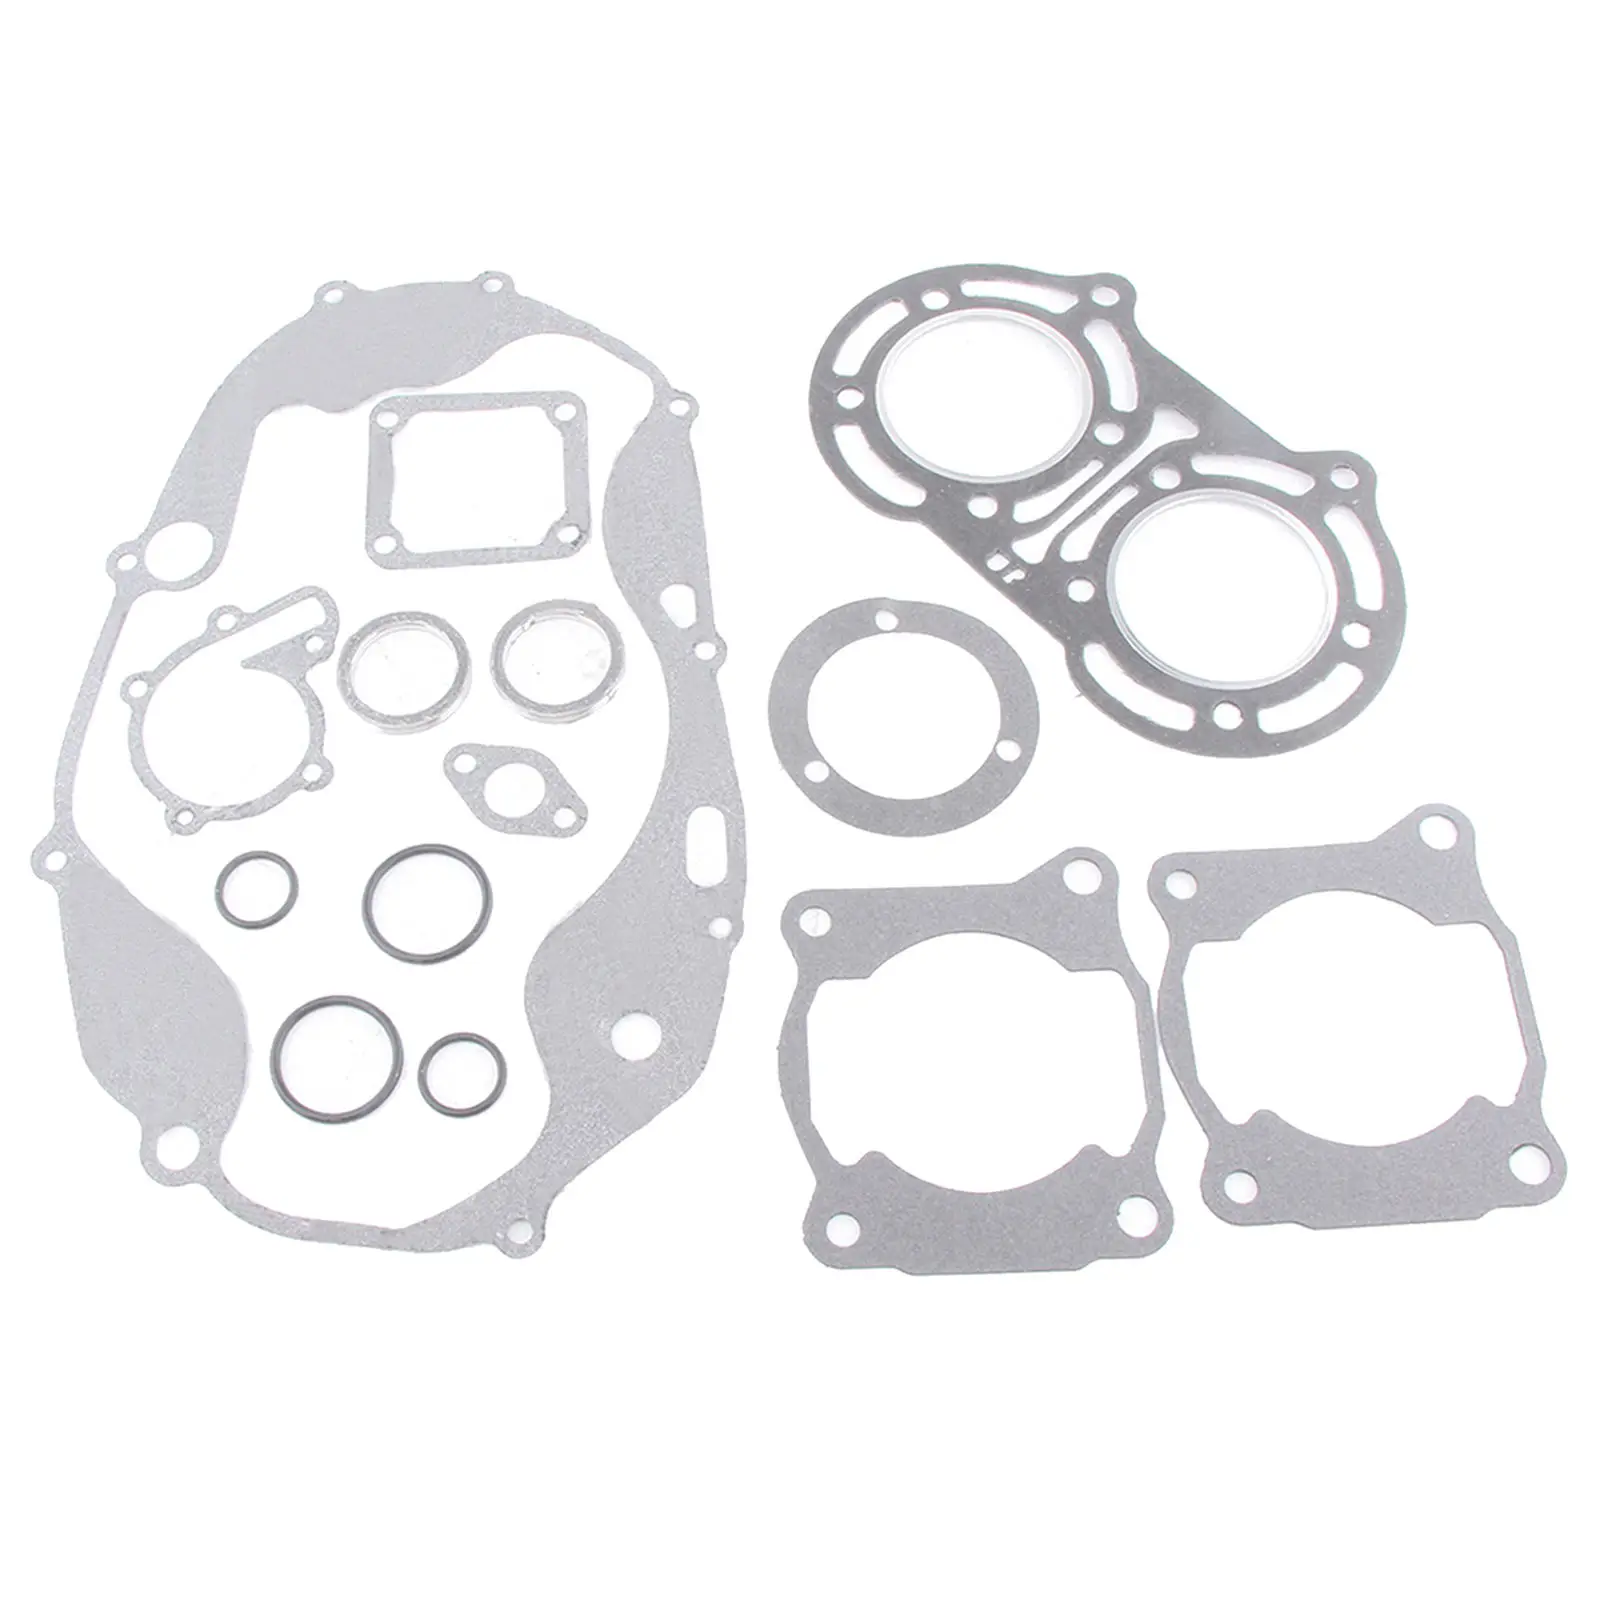 Replacement Complete Engine Gasket Kit for Yamaha ATV YFZ350 1987-2006 GS34